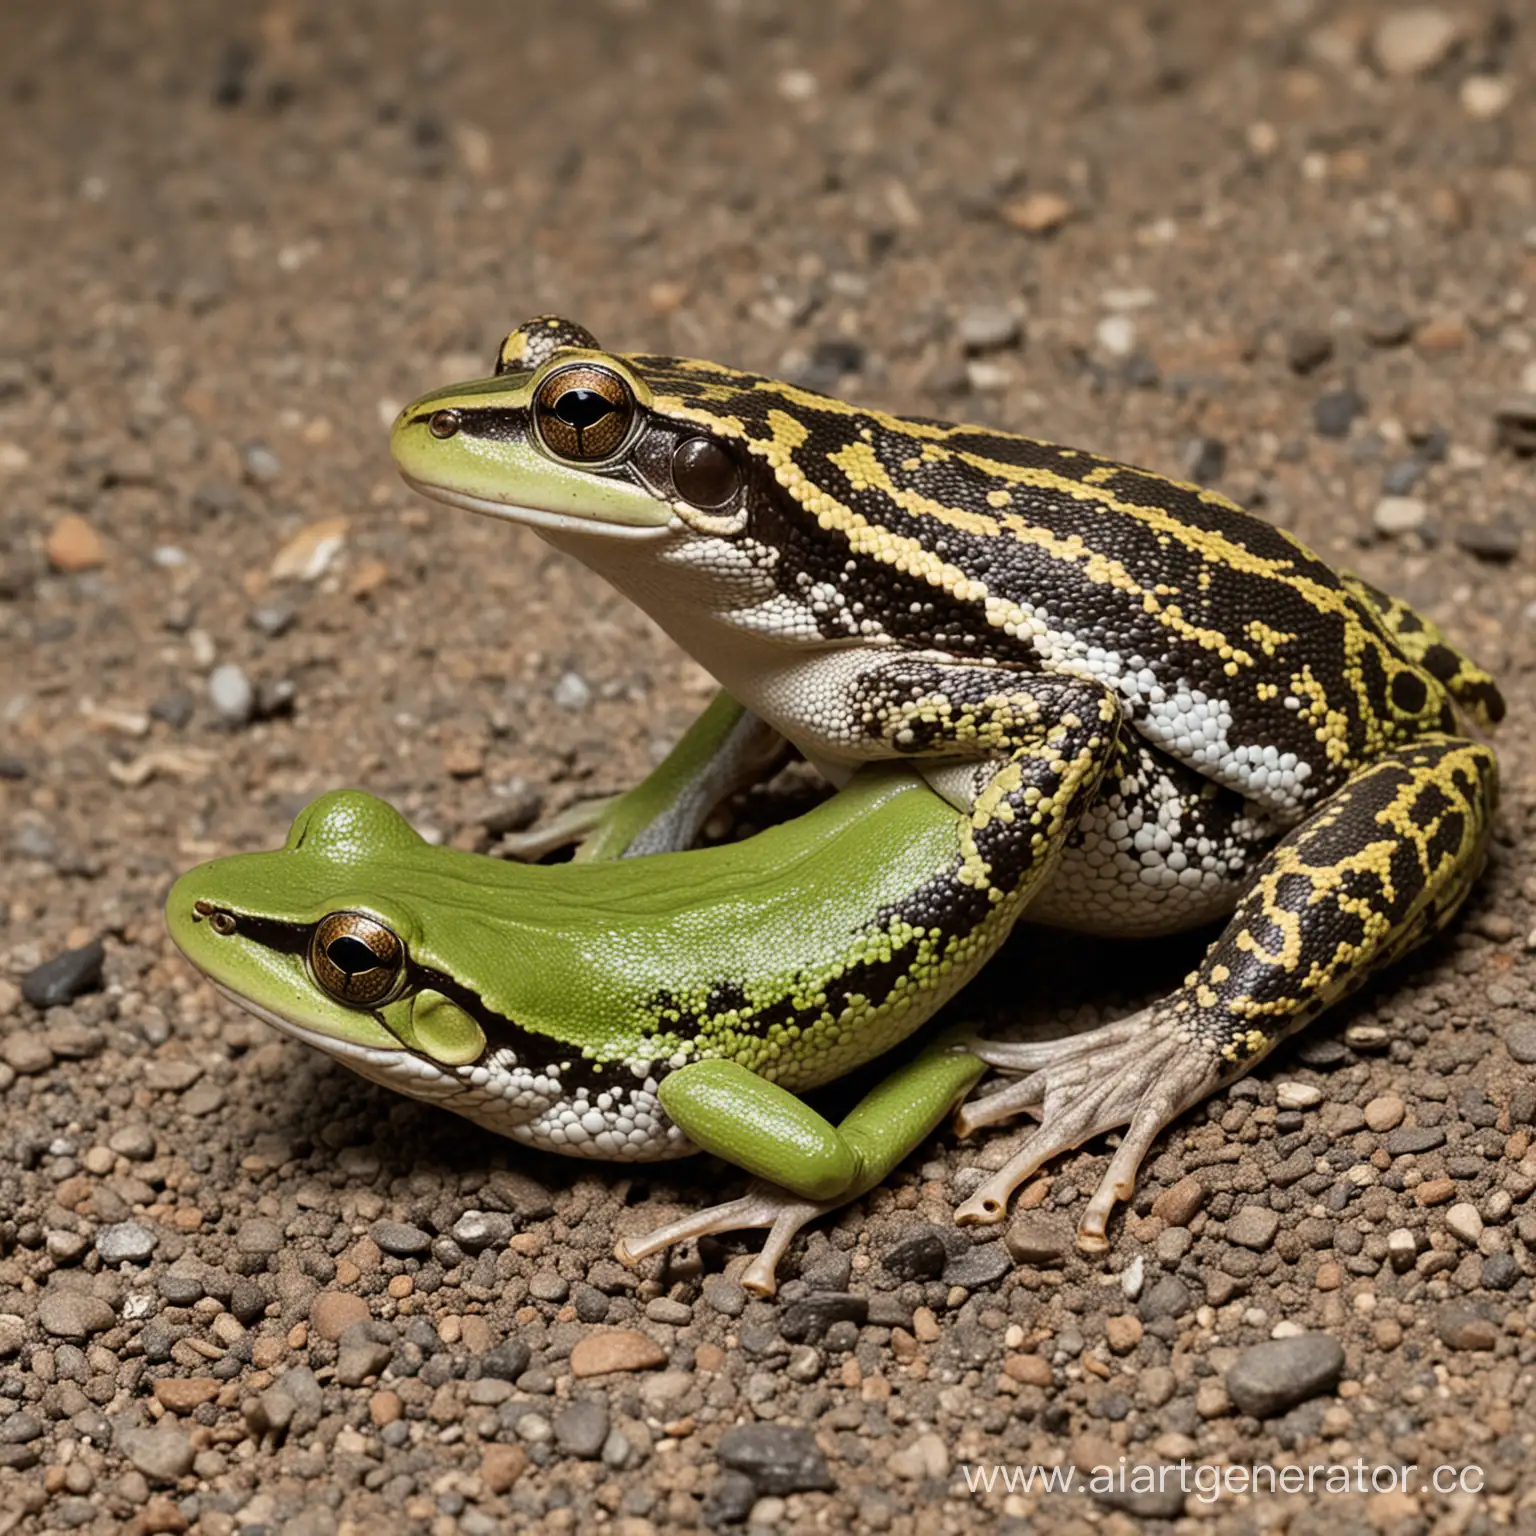 mating of a frog and a viper